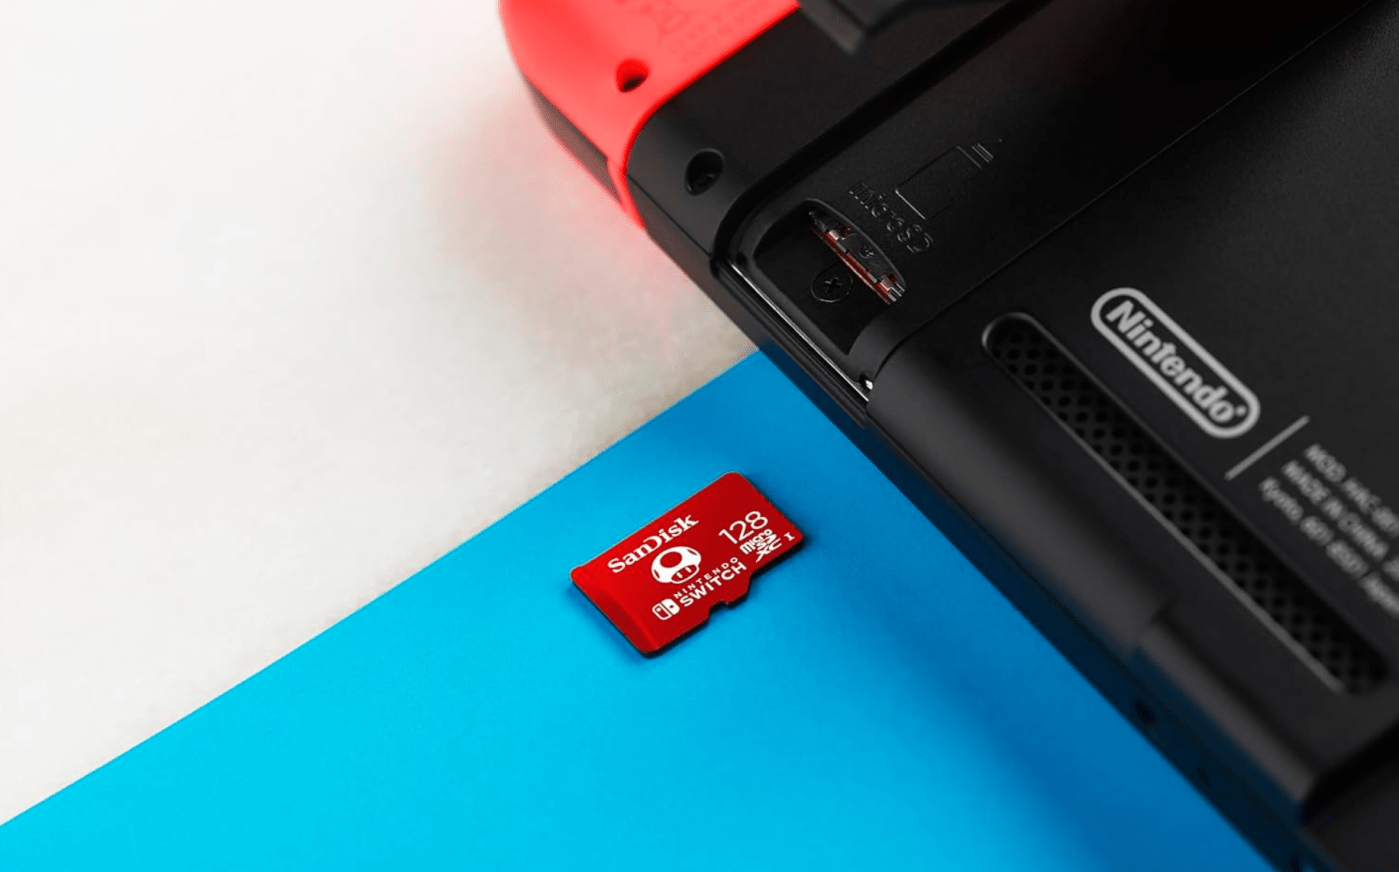 Prime members can get two Switch-ready SanDisk microSD cards for $25 in the Amazon Spring Sale